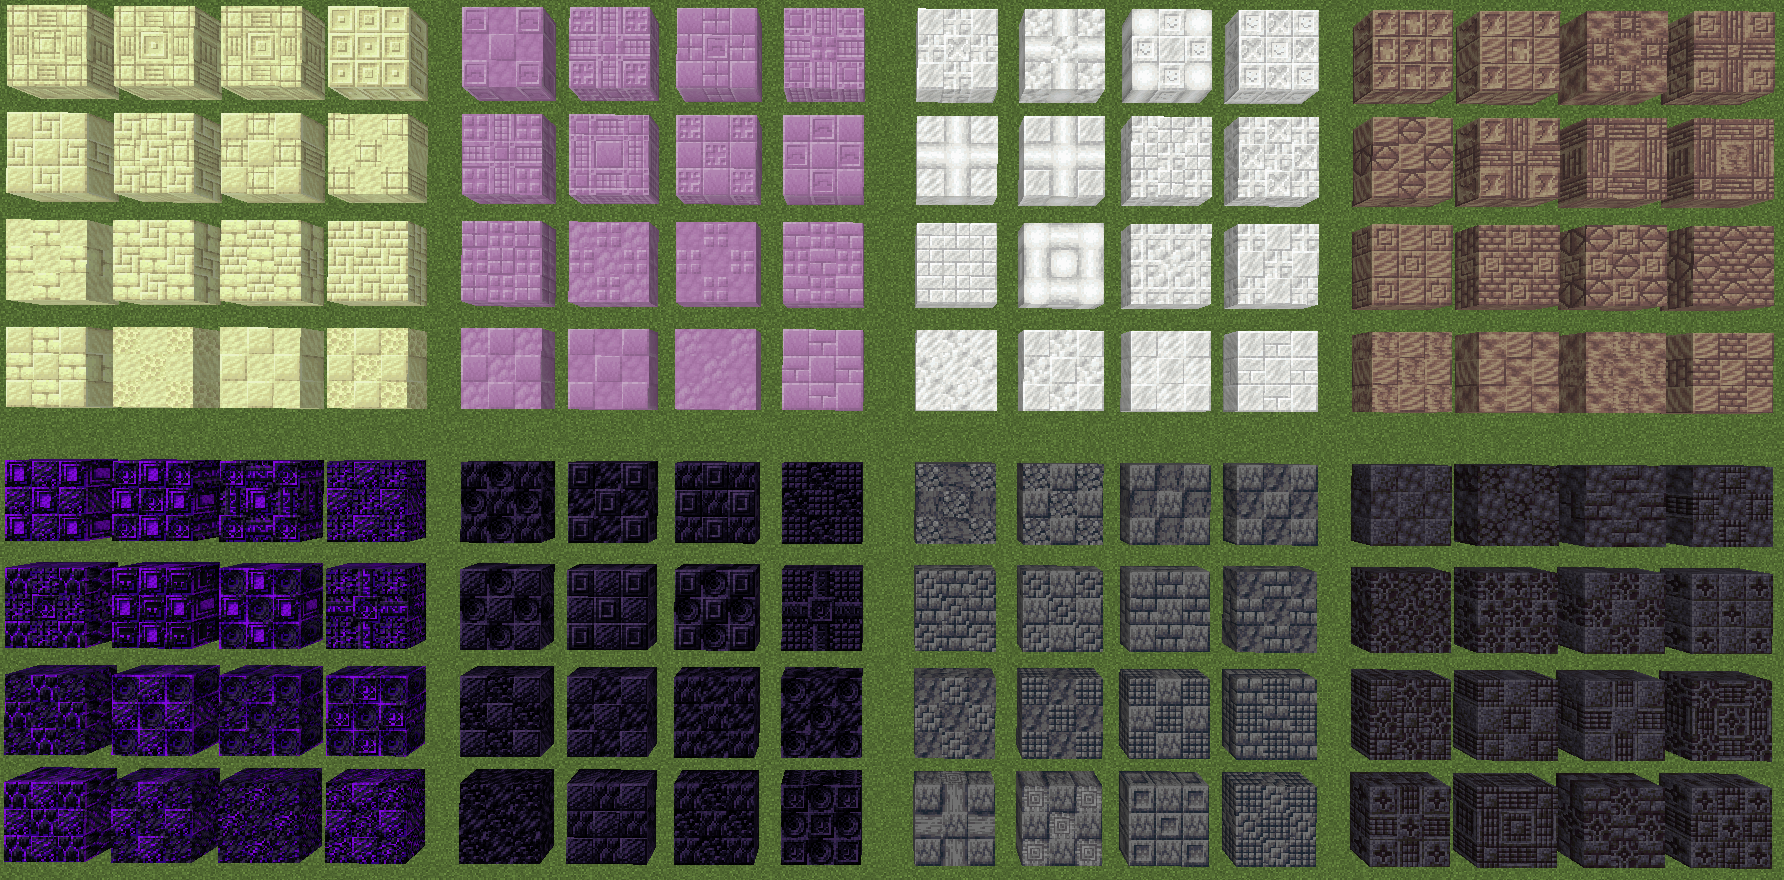 Block sets can create tons of patterns